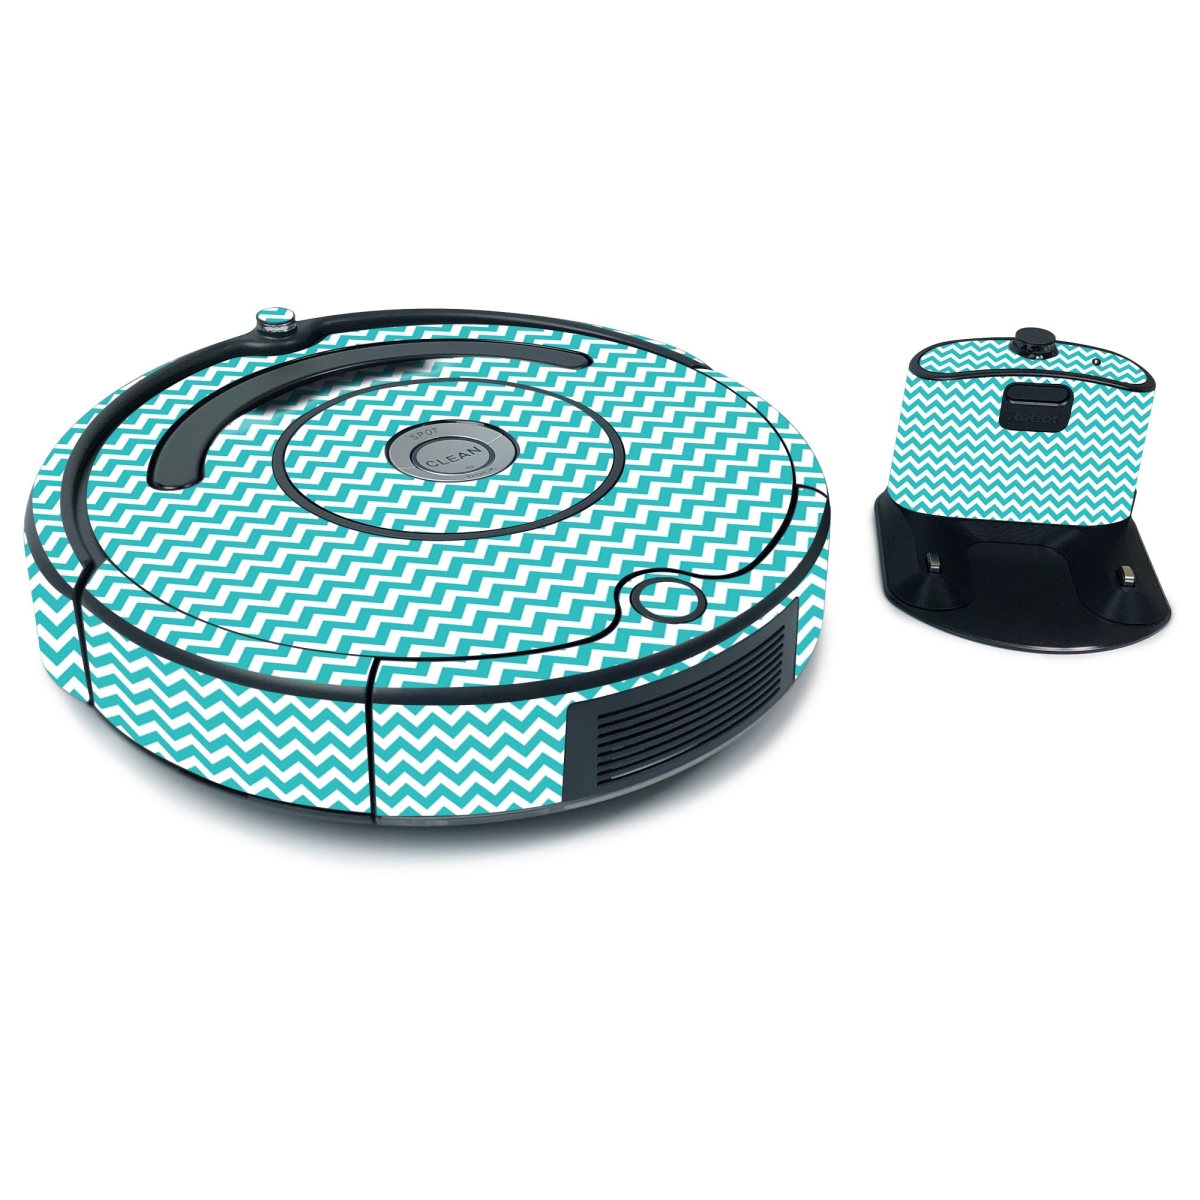 Picture of MightySkins IRRO675-Turquoise Chevron Skin for iRobot Roomba 675 Max Coverage - Turquoise Chevron